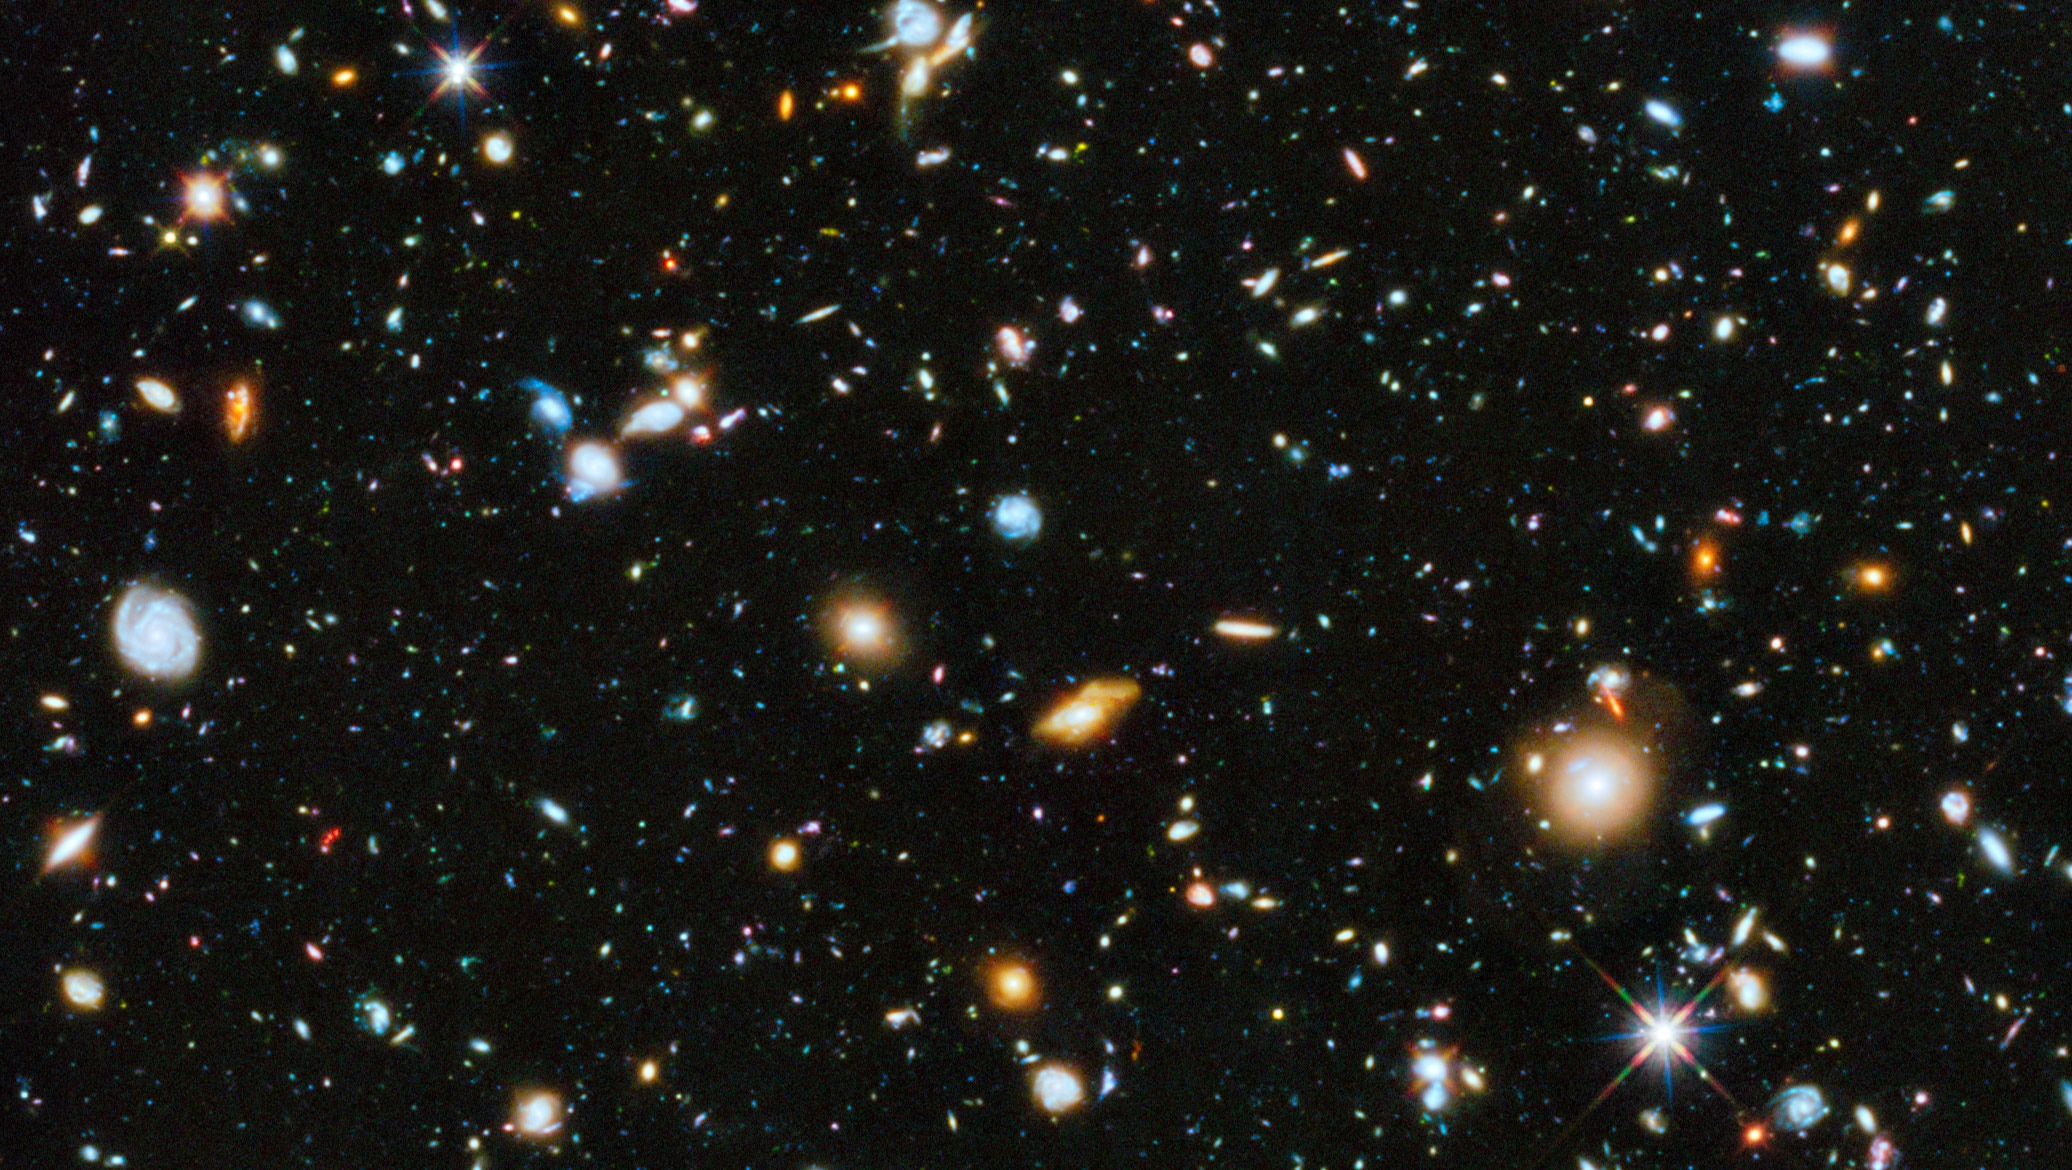 This is the Hubble Ultra Deep Field, and almost everything you see in it is a distant galaxy, billions of light years away. Credit: NASA, ESA, H. Teplitz and M. Rafelski (IPAC/Caltech), A. Koekemoer (STScI), R. Windhorst (Arizona State University), and Z.